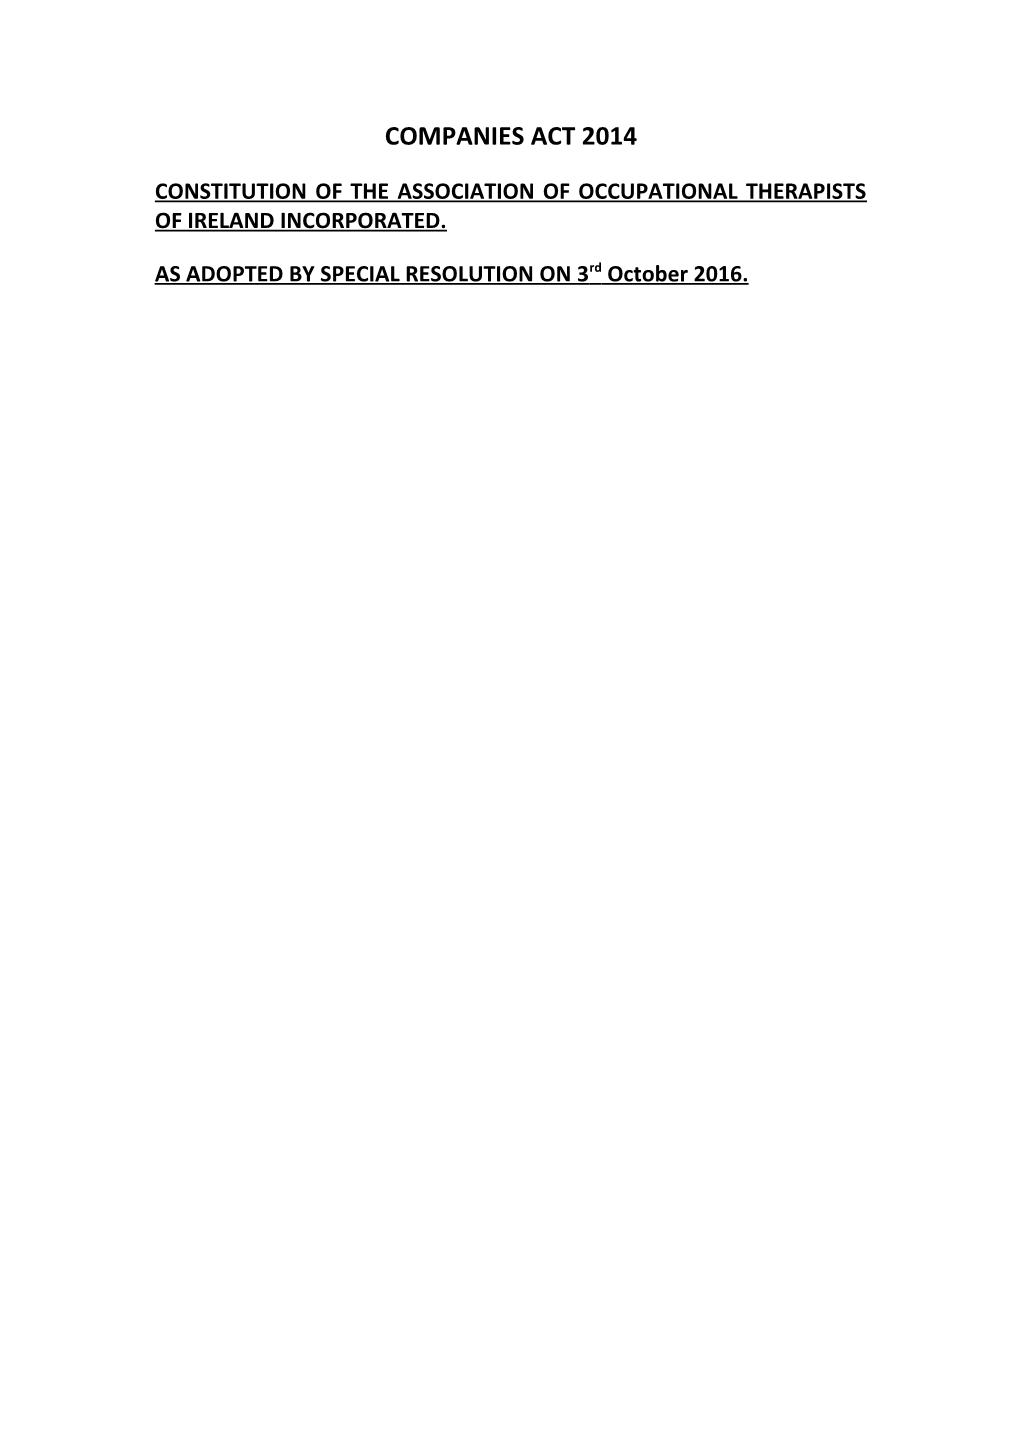 Constitution of the Association of Occupational Therapists of Ireland Incorporated